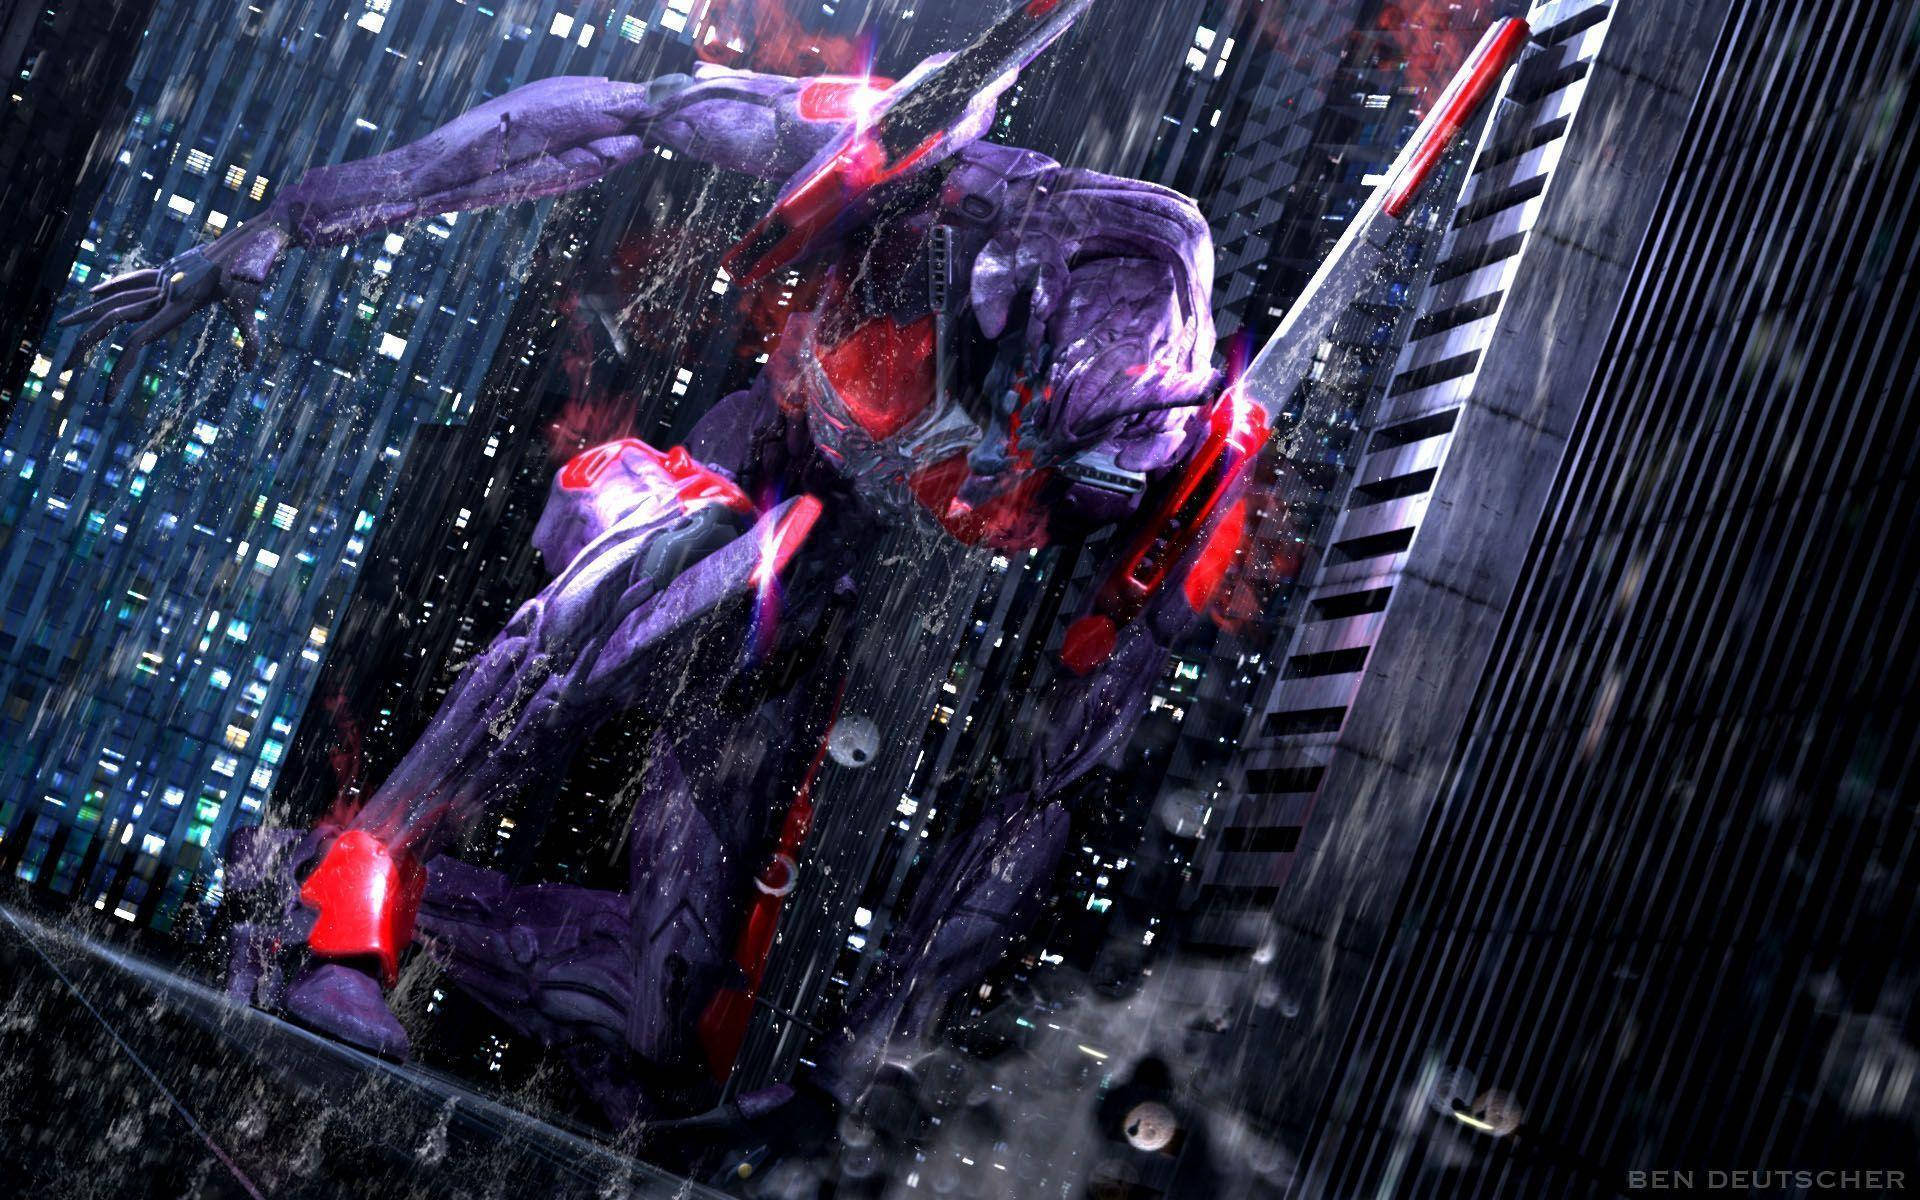 130+ Evangelion Unit-01 HD Wallpapers and Backgrounds